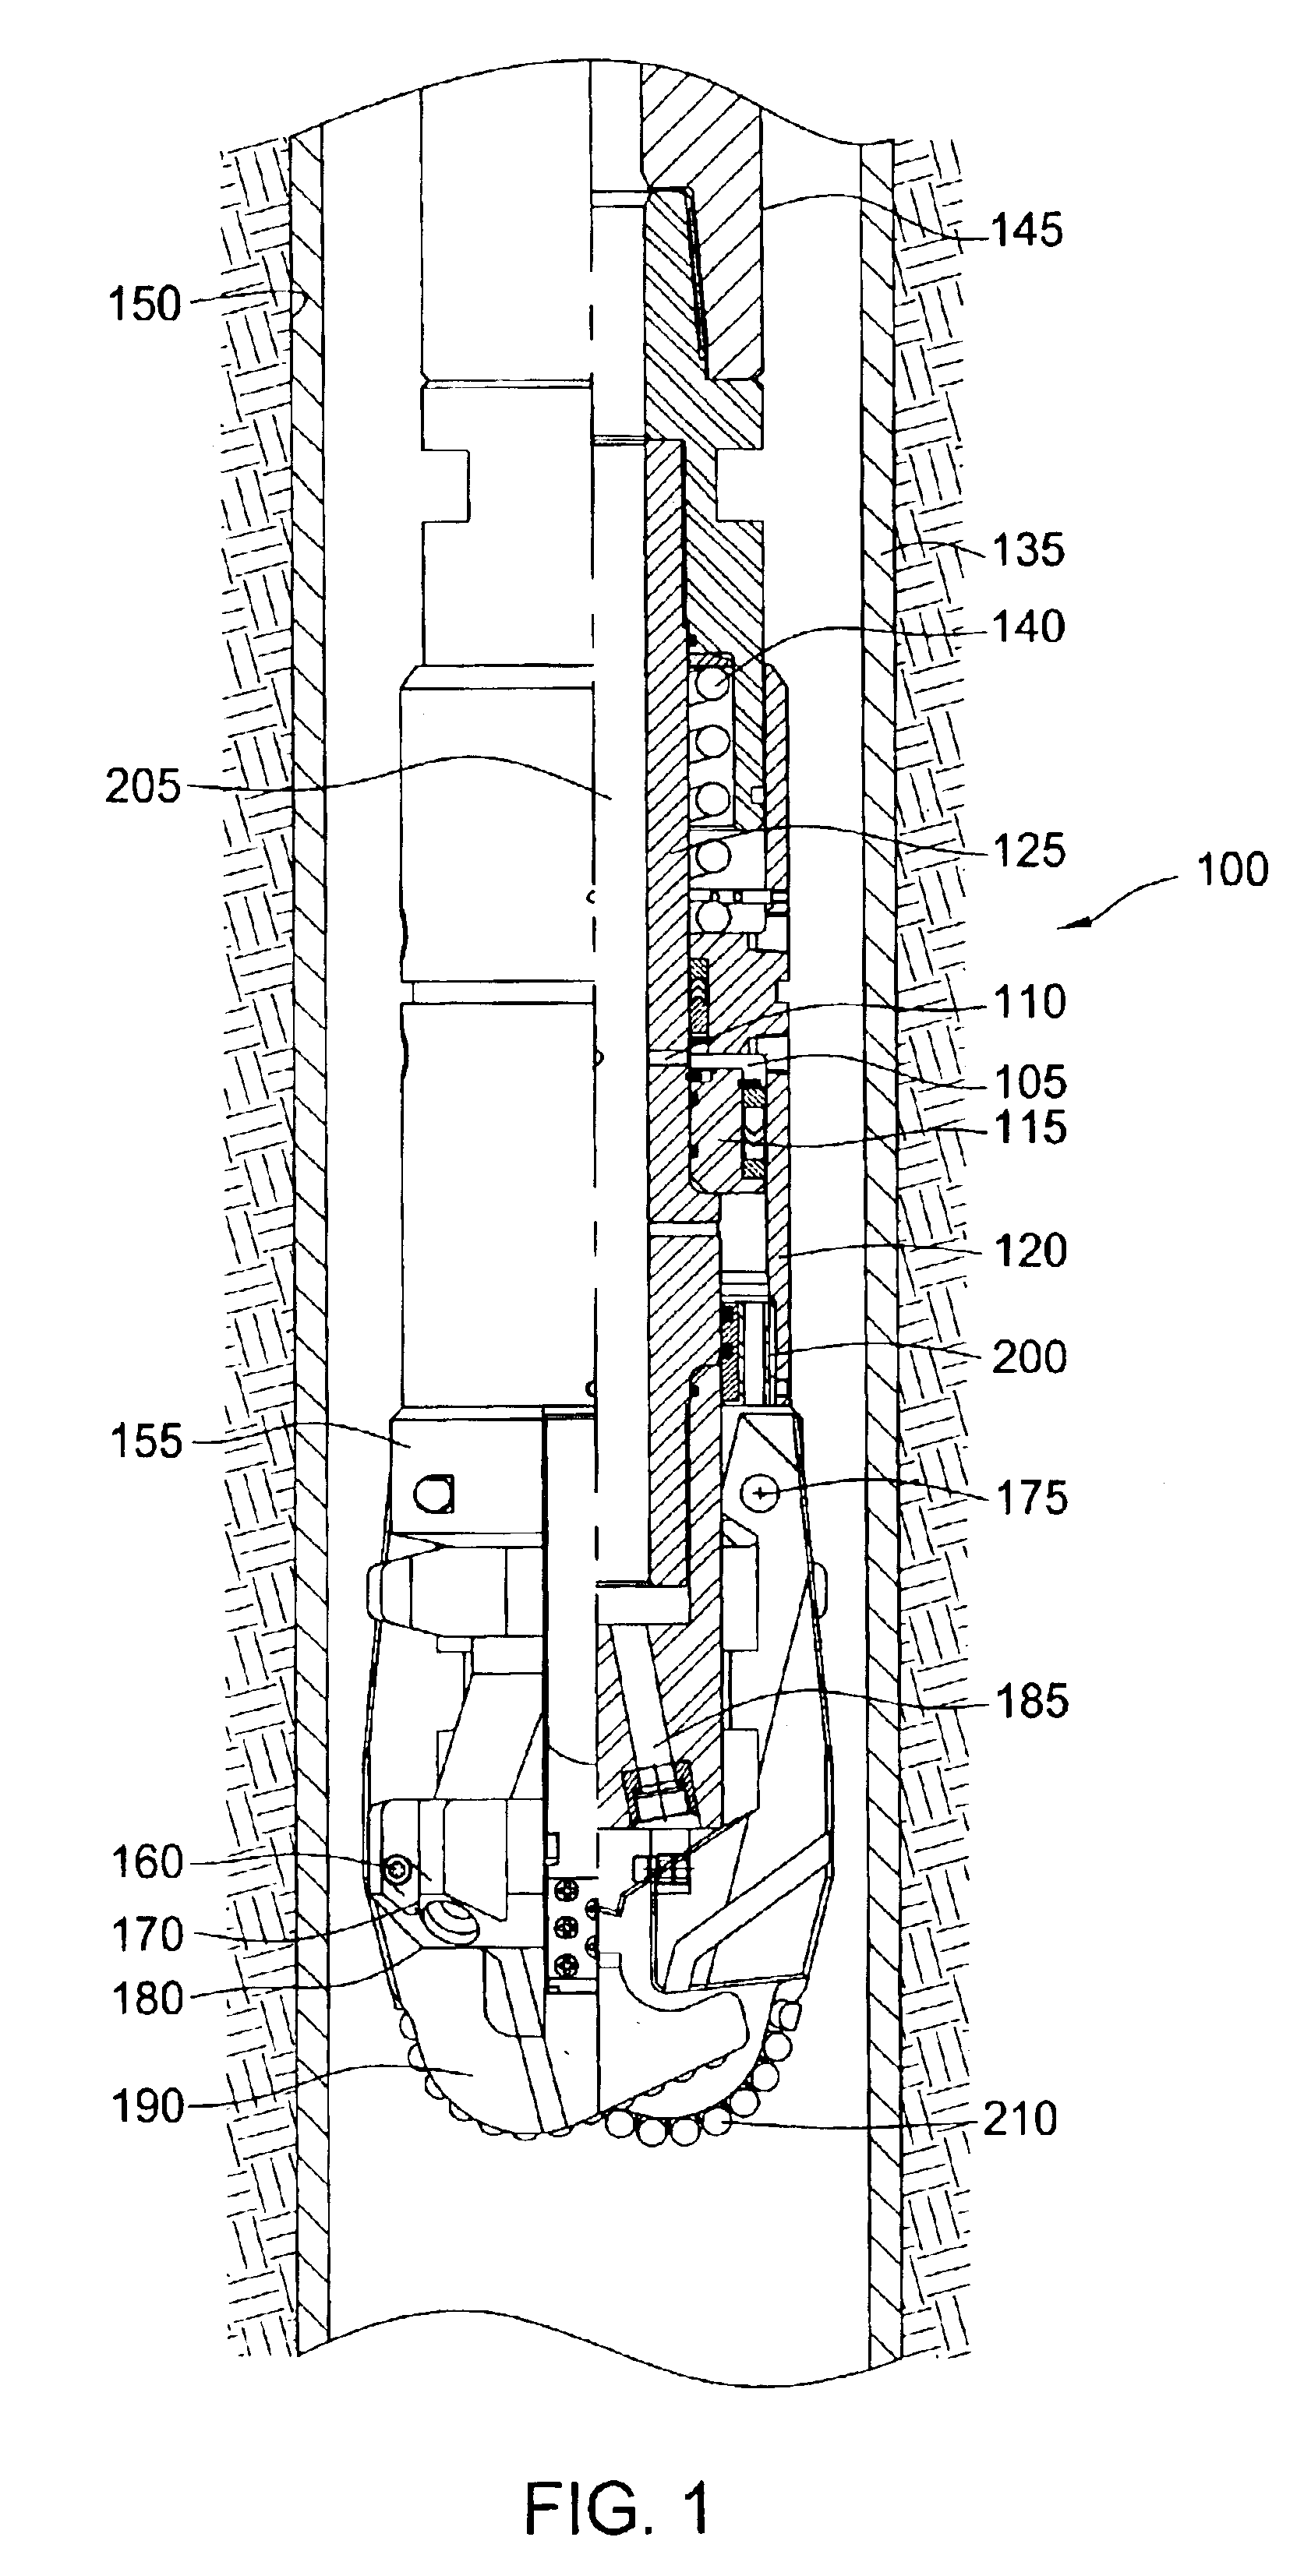 Expandable bit with secondary release device